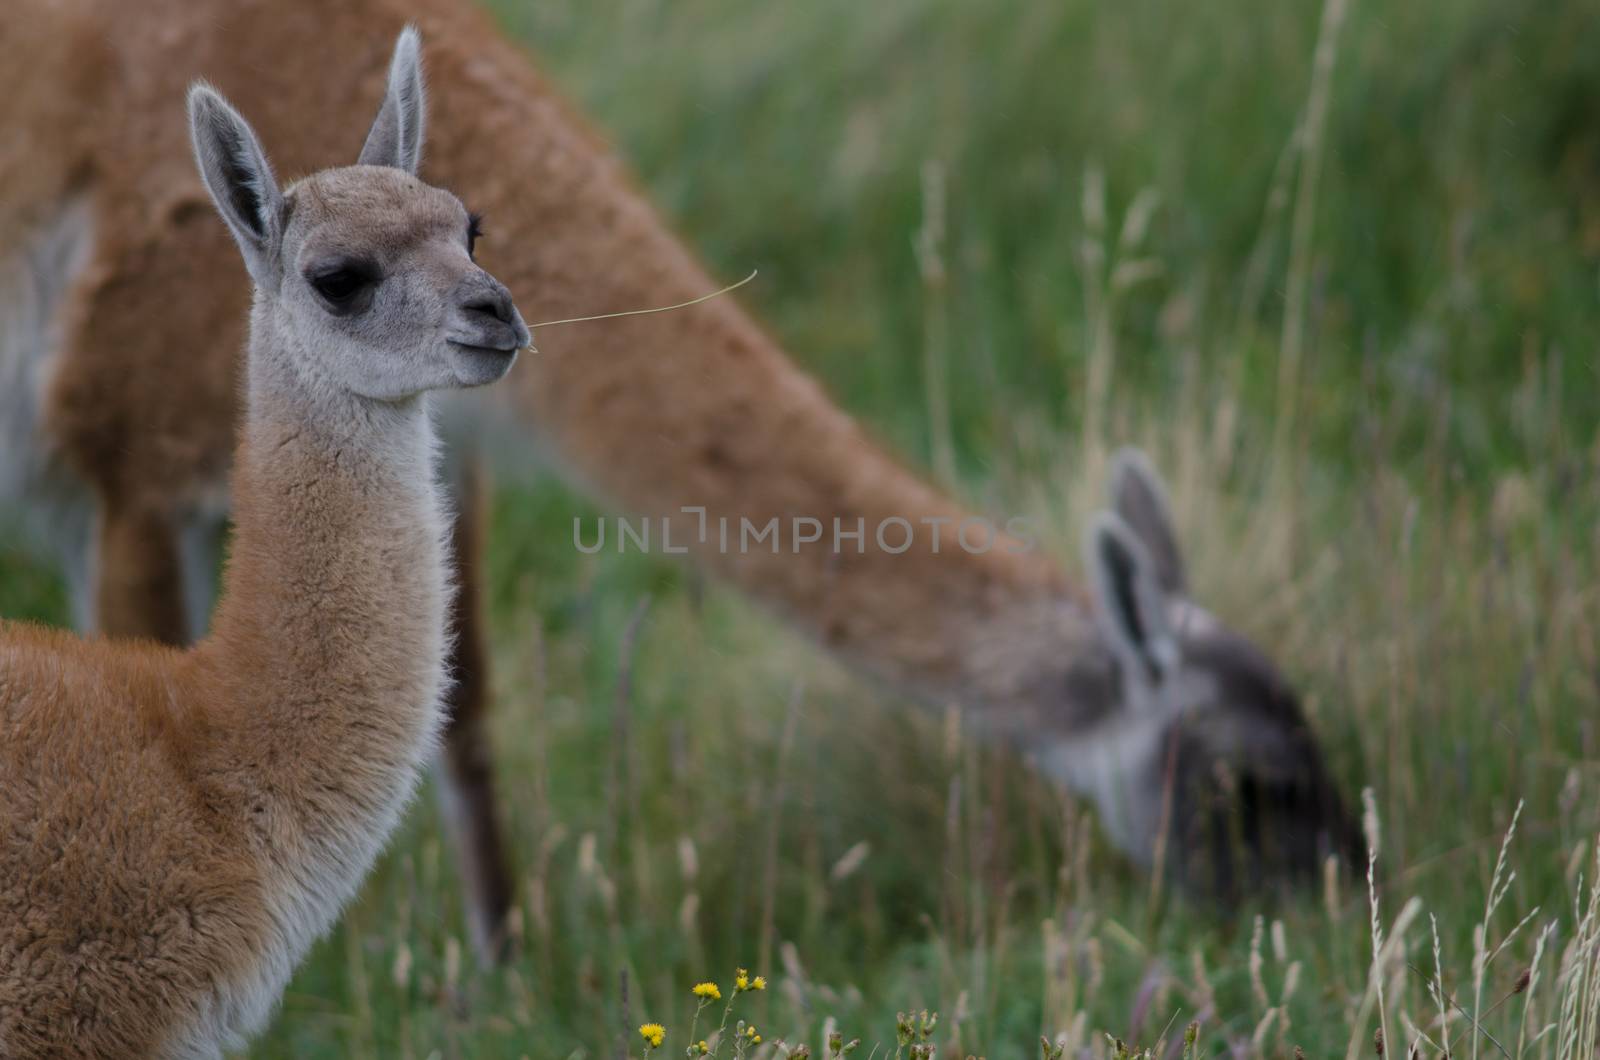 Guanacos Lama guanicoe eating with cub in the foreground. by VictorSuarez